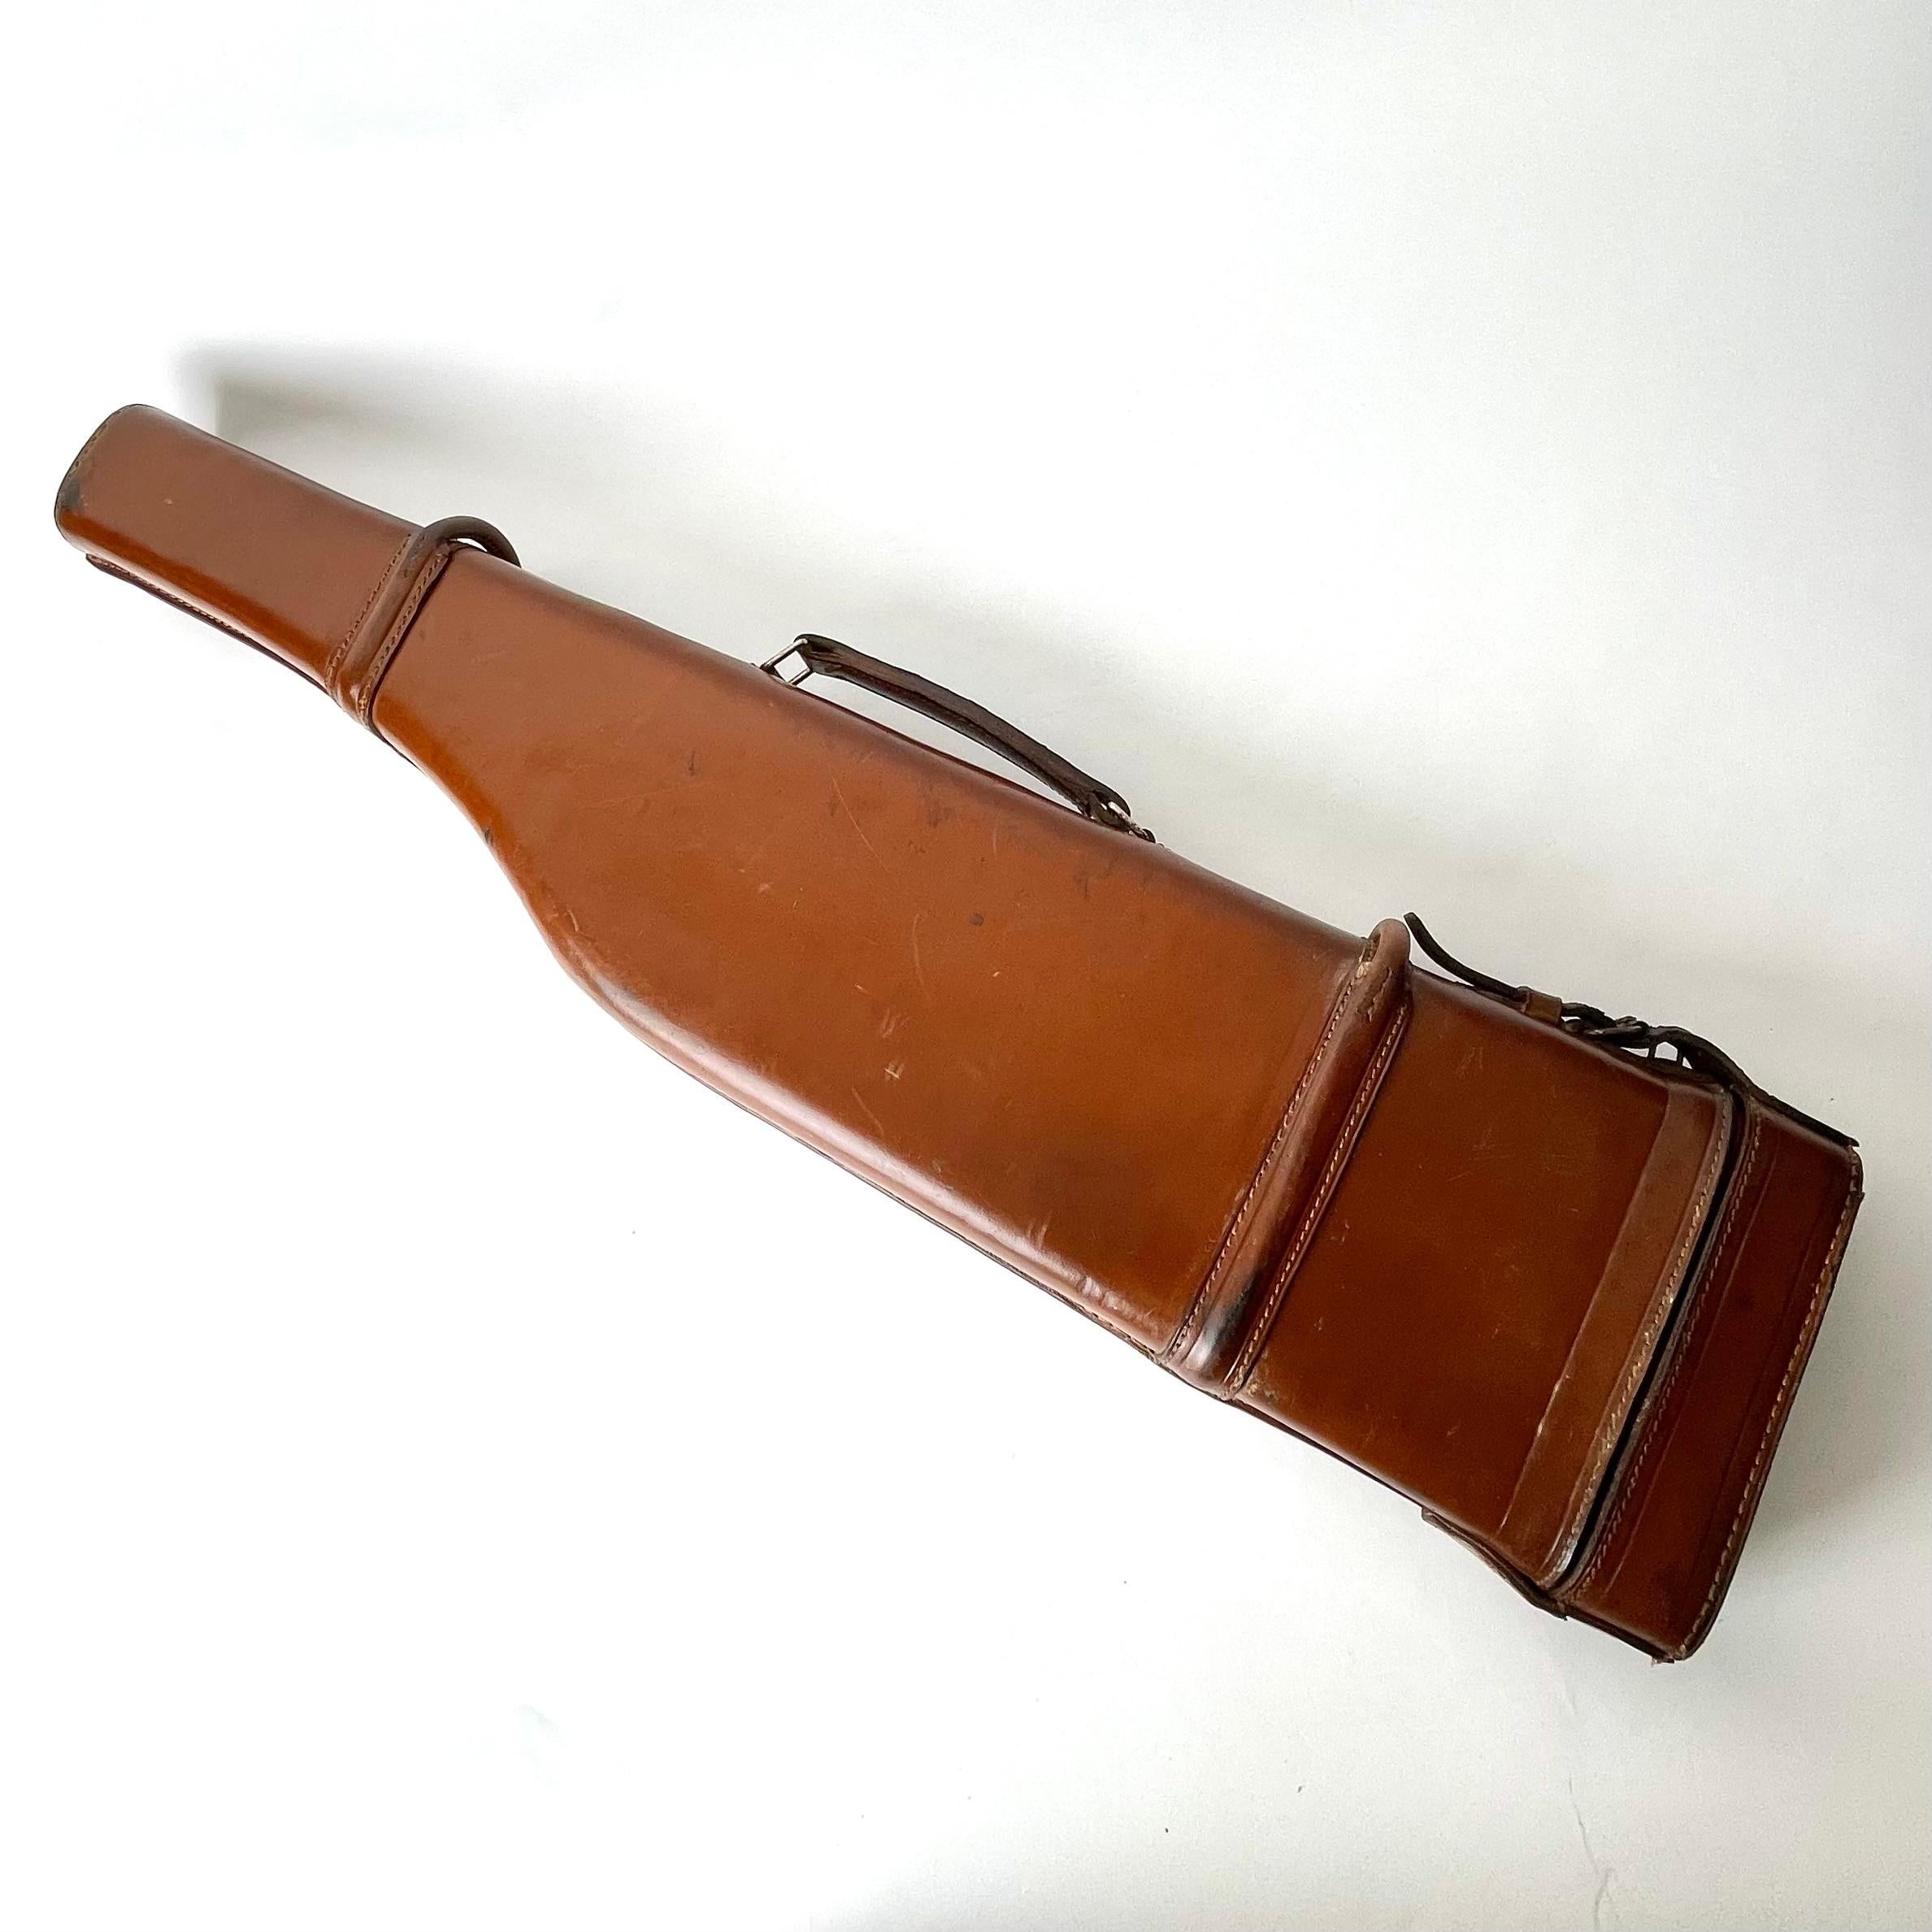 Elegant Gun Case from Holland & Holland from the 1920-30s. Discretely marked Holland & Holland at the top of the case. (see picture)

Wear consistent with age and use 

